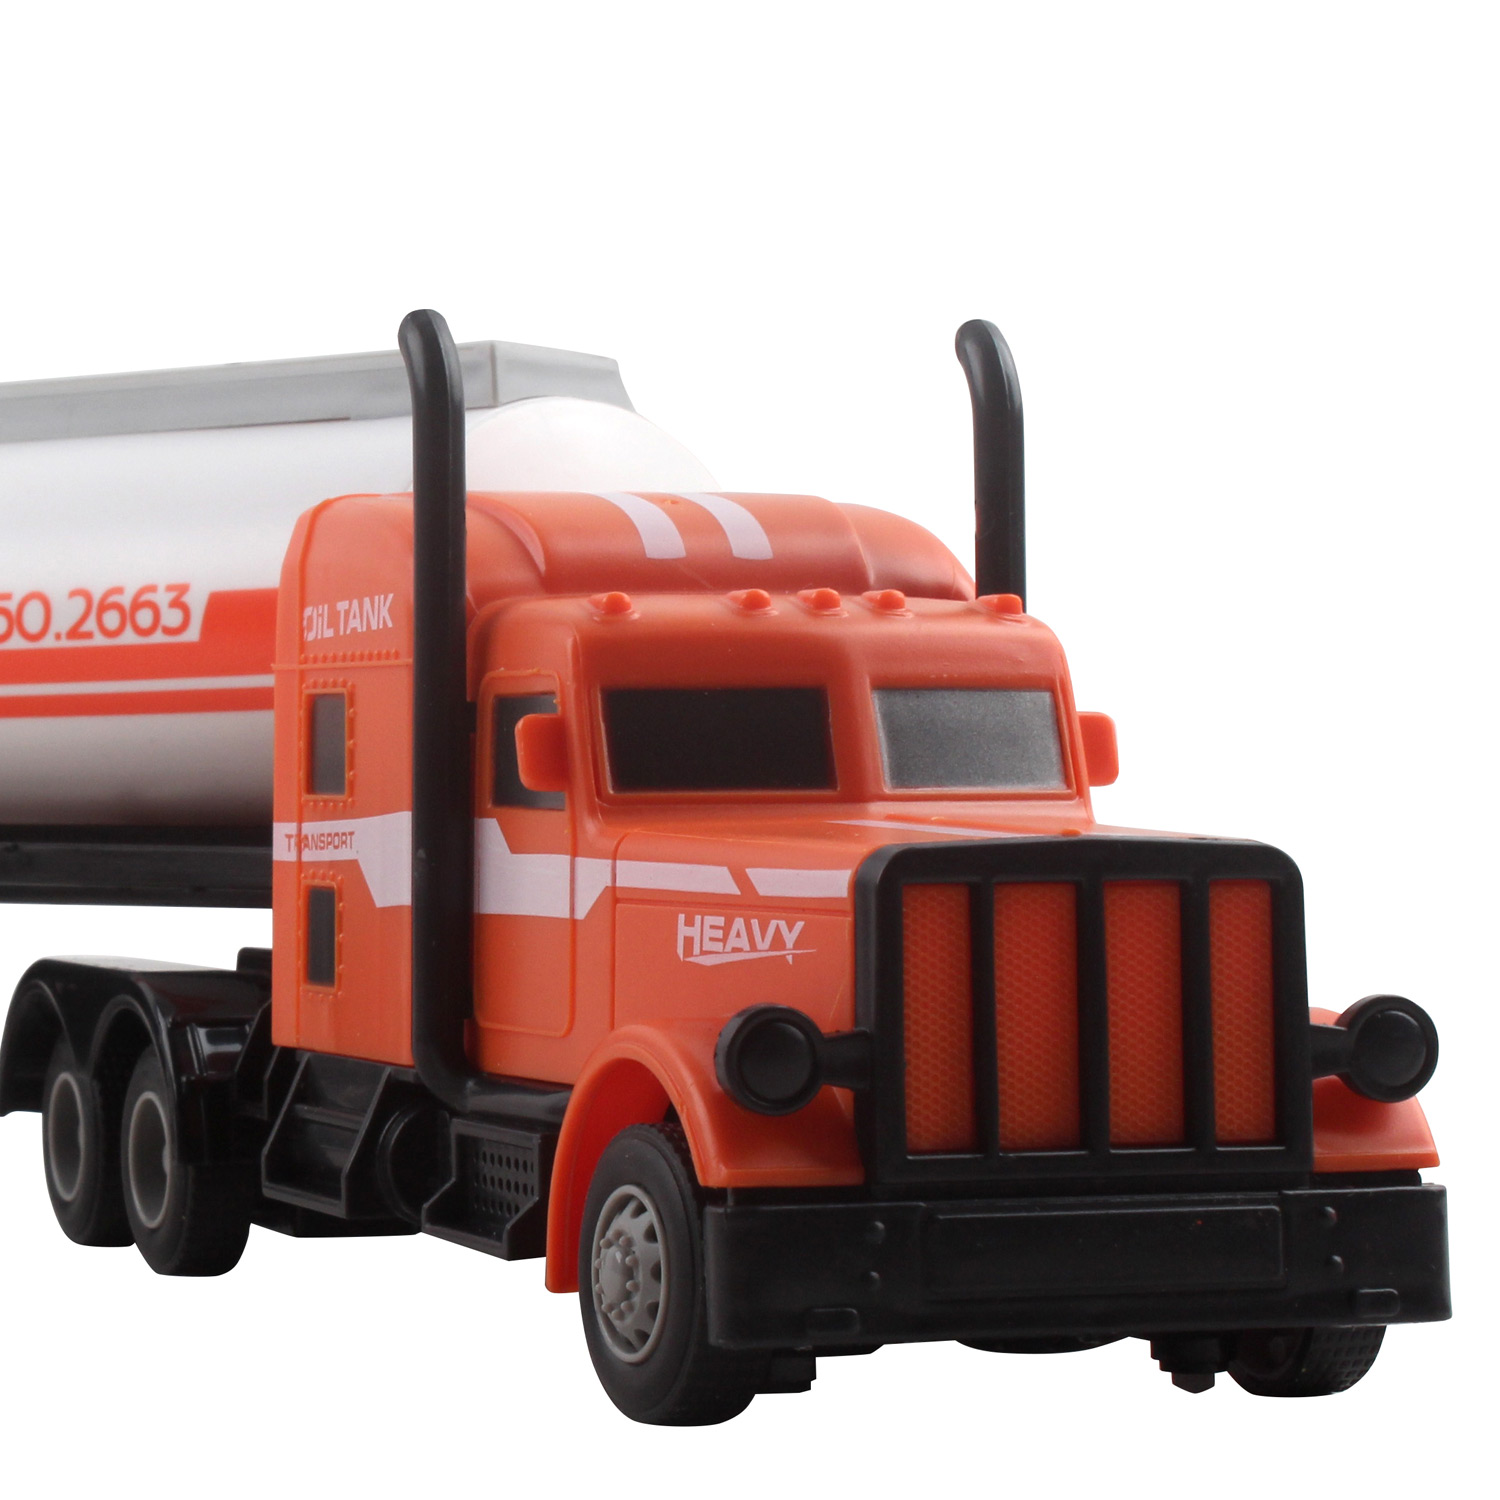 Large RC Toy Semi Truck Fuel Trailer 24Ghz Fast Speed 120 Scale Electric Oil Hauler Rechargeable Remote Control Kids Big Rig Carrier Transporter Vehicle Full Cargo Perfect Childrens Toy Gift